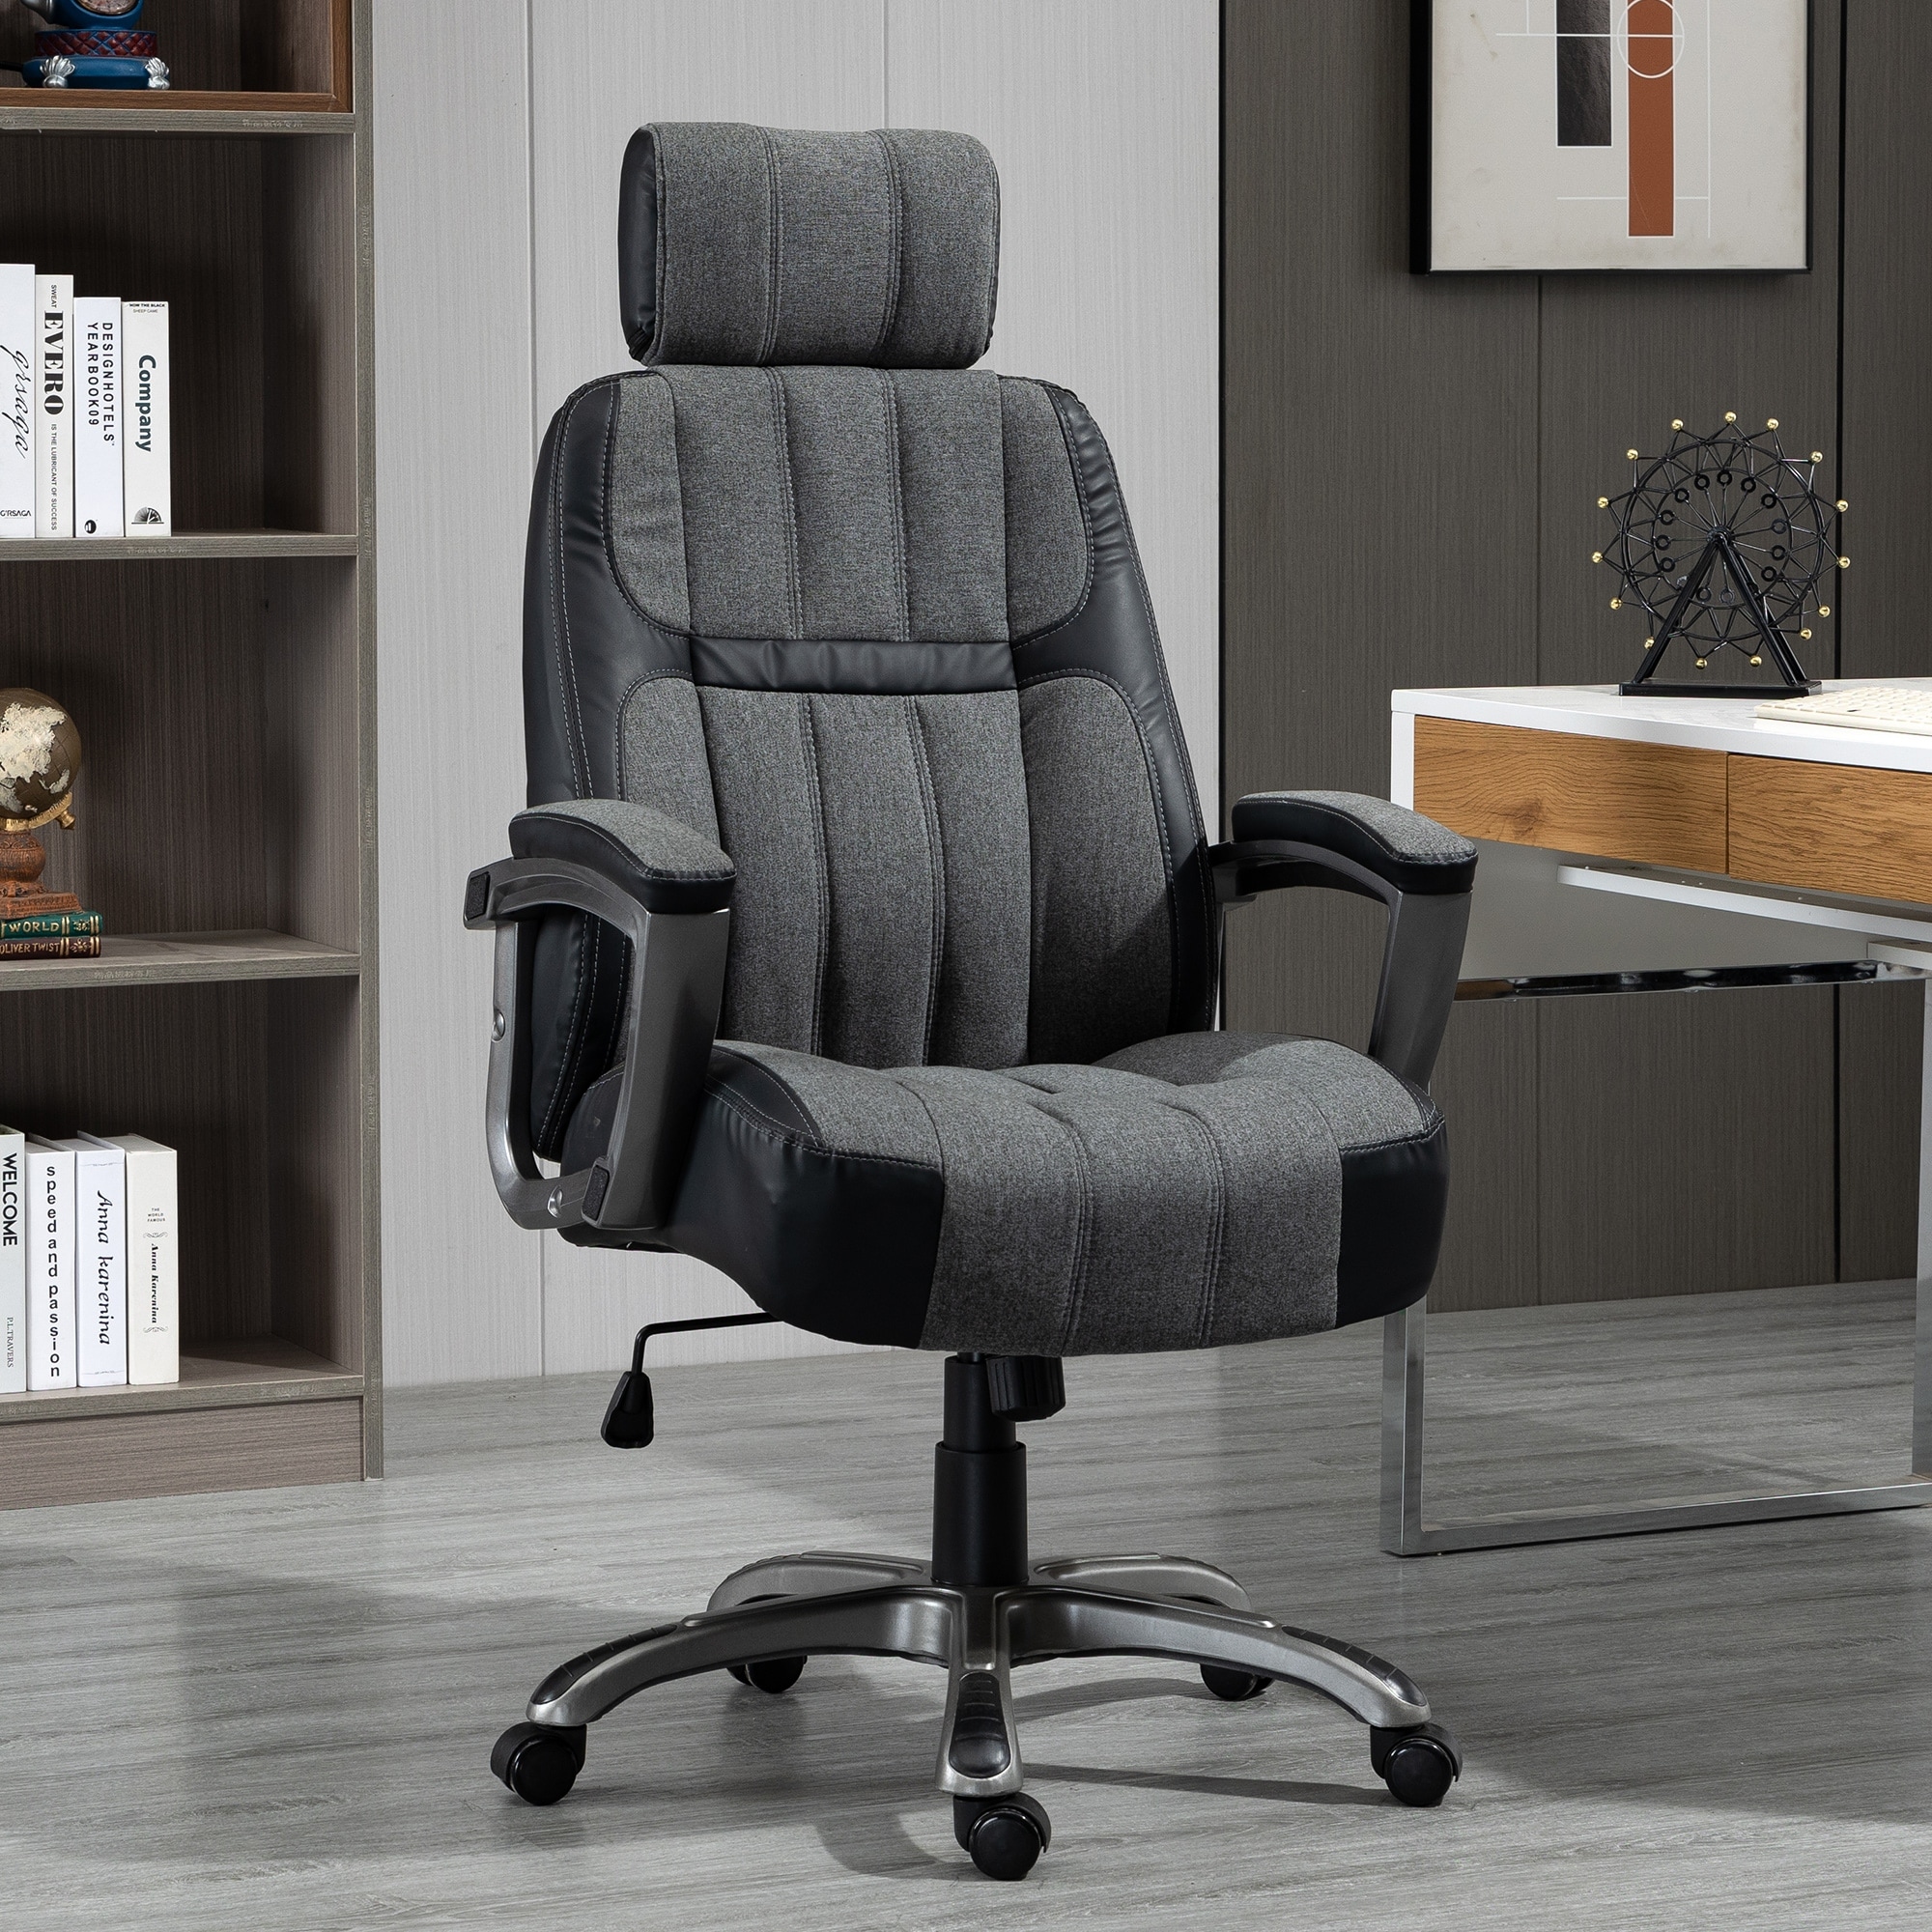 Vinsetto 360° Swivel Executive Home Office Chair Adjustable Height